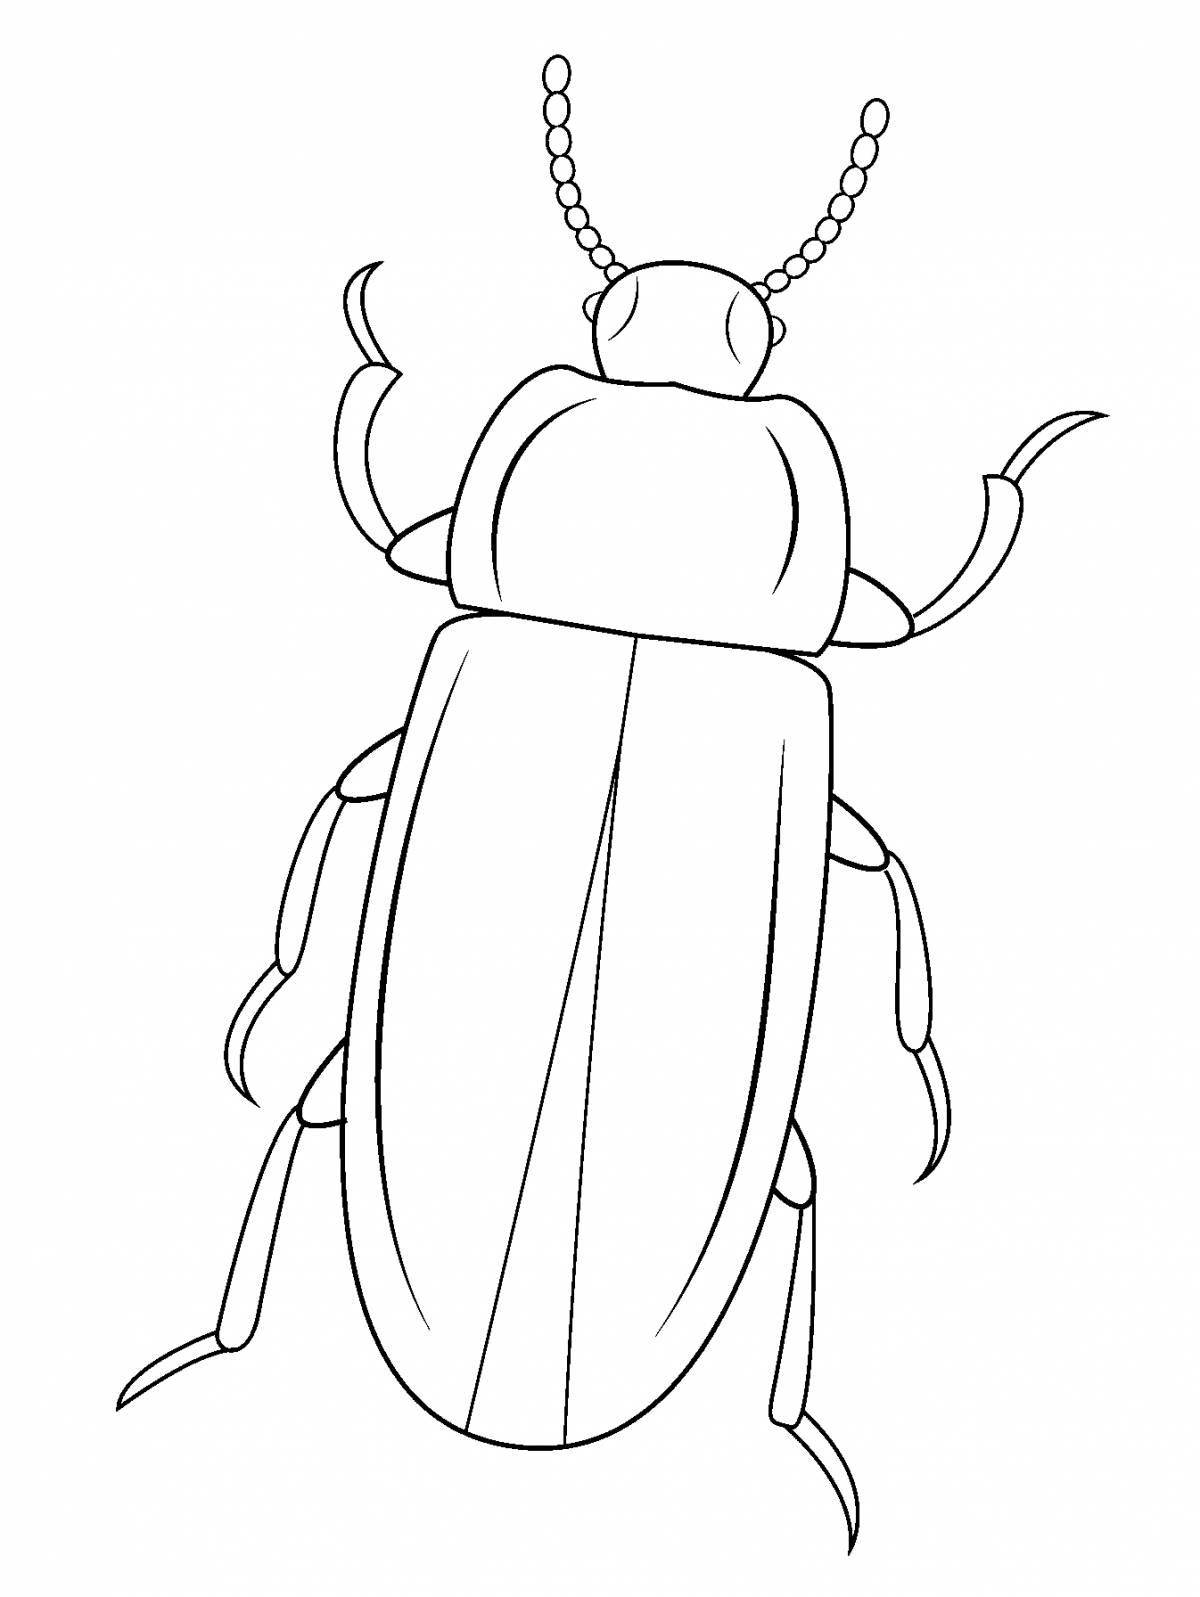 Live coloring page bug